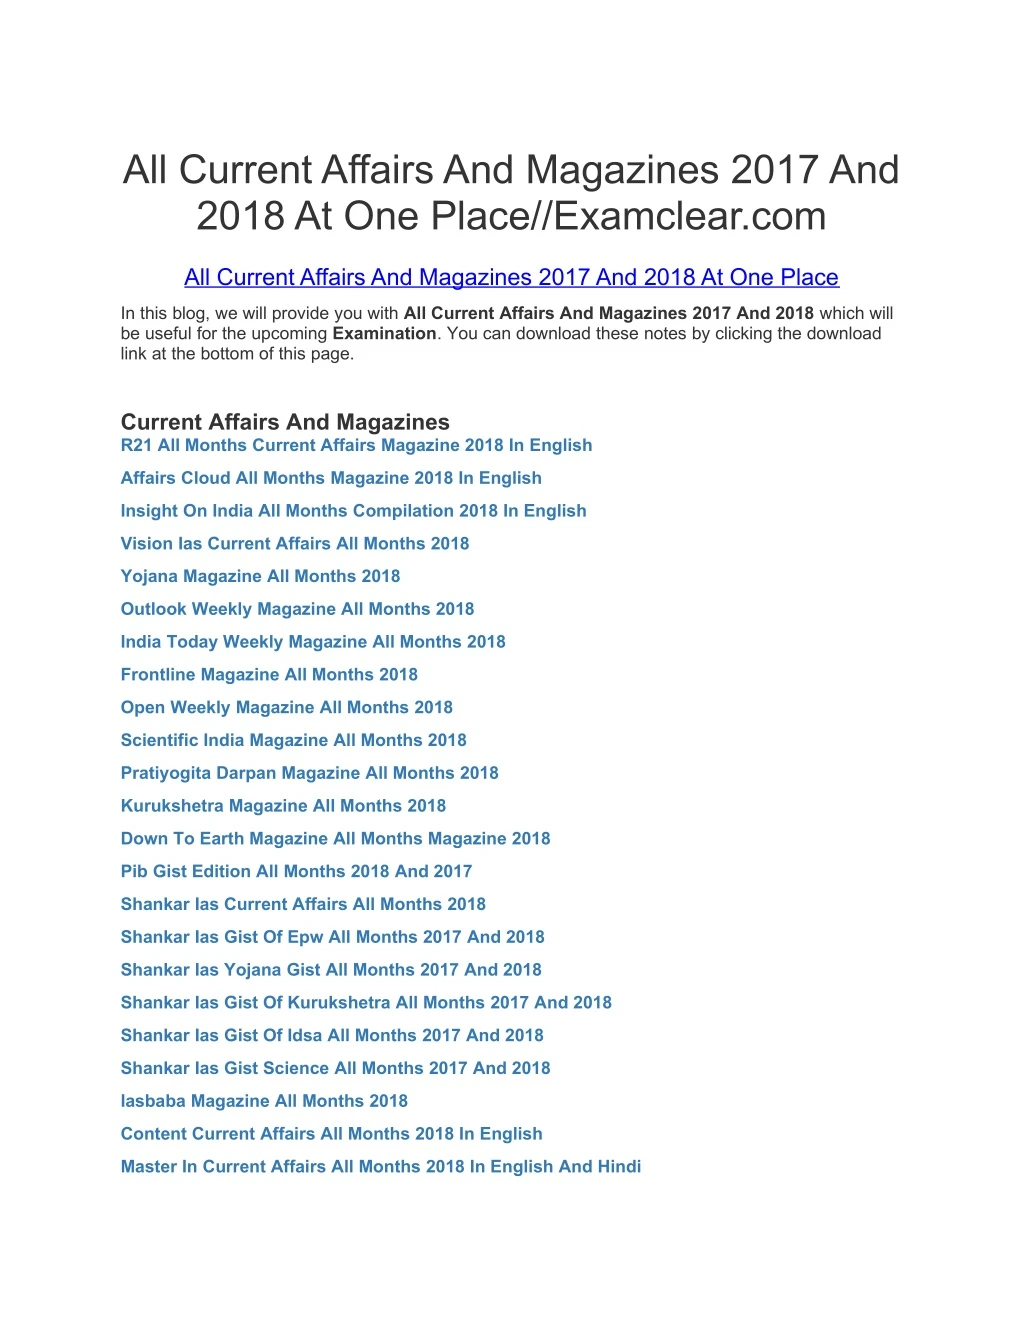 all current affairs and magazines 2017 and 2018